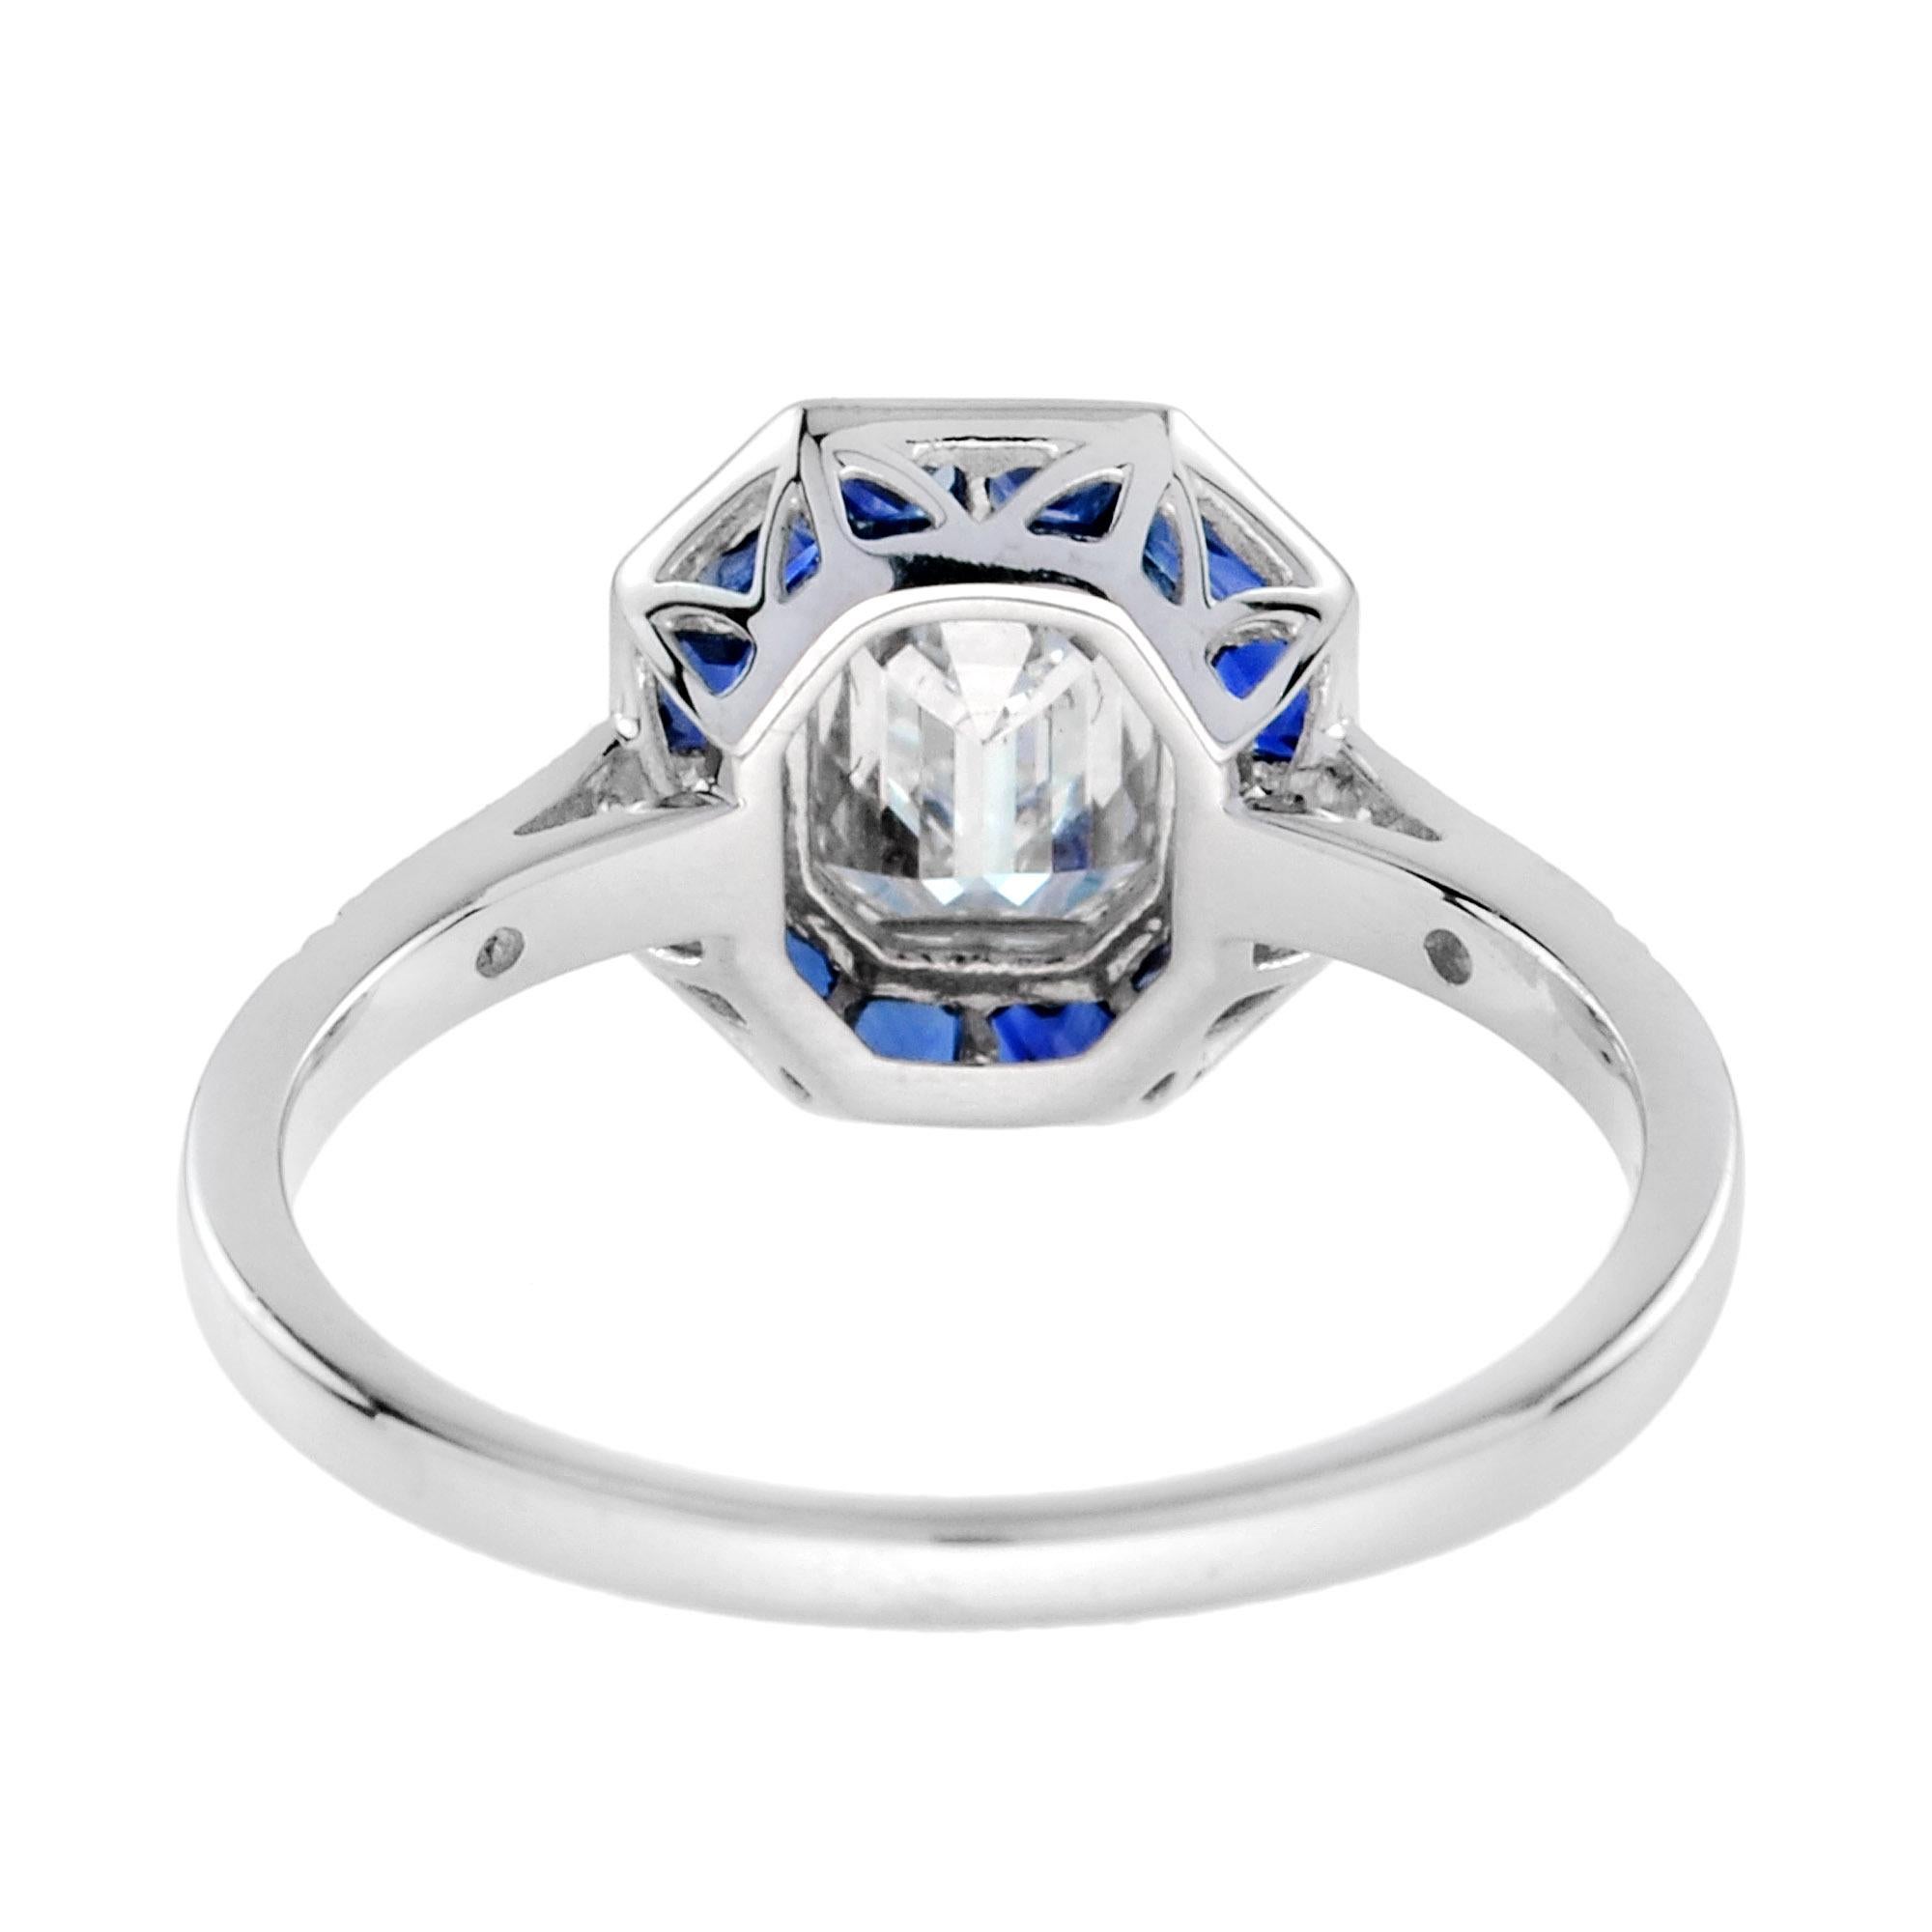 French Cut One Art Deco Style GIA Certified 0.92 Carat Diamond with Sapphire Ring 